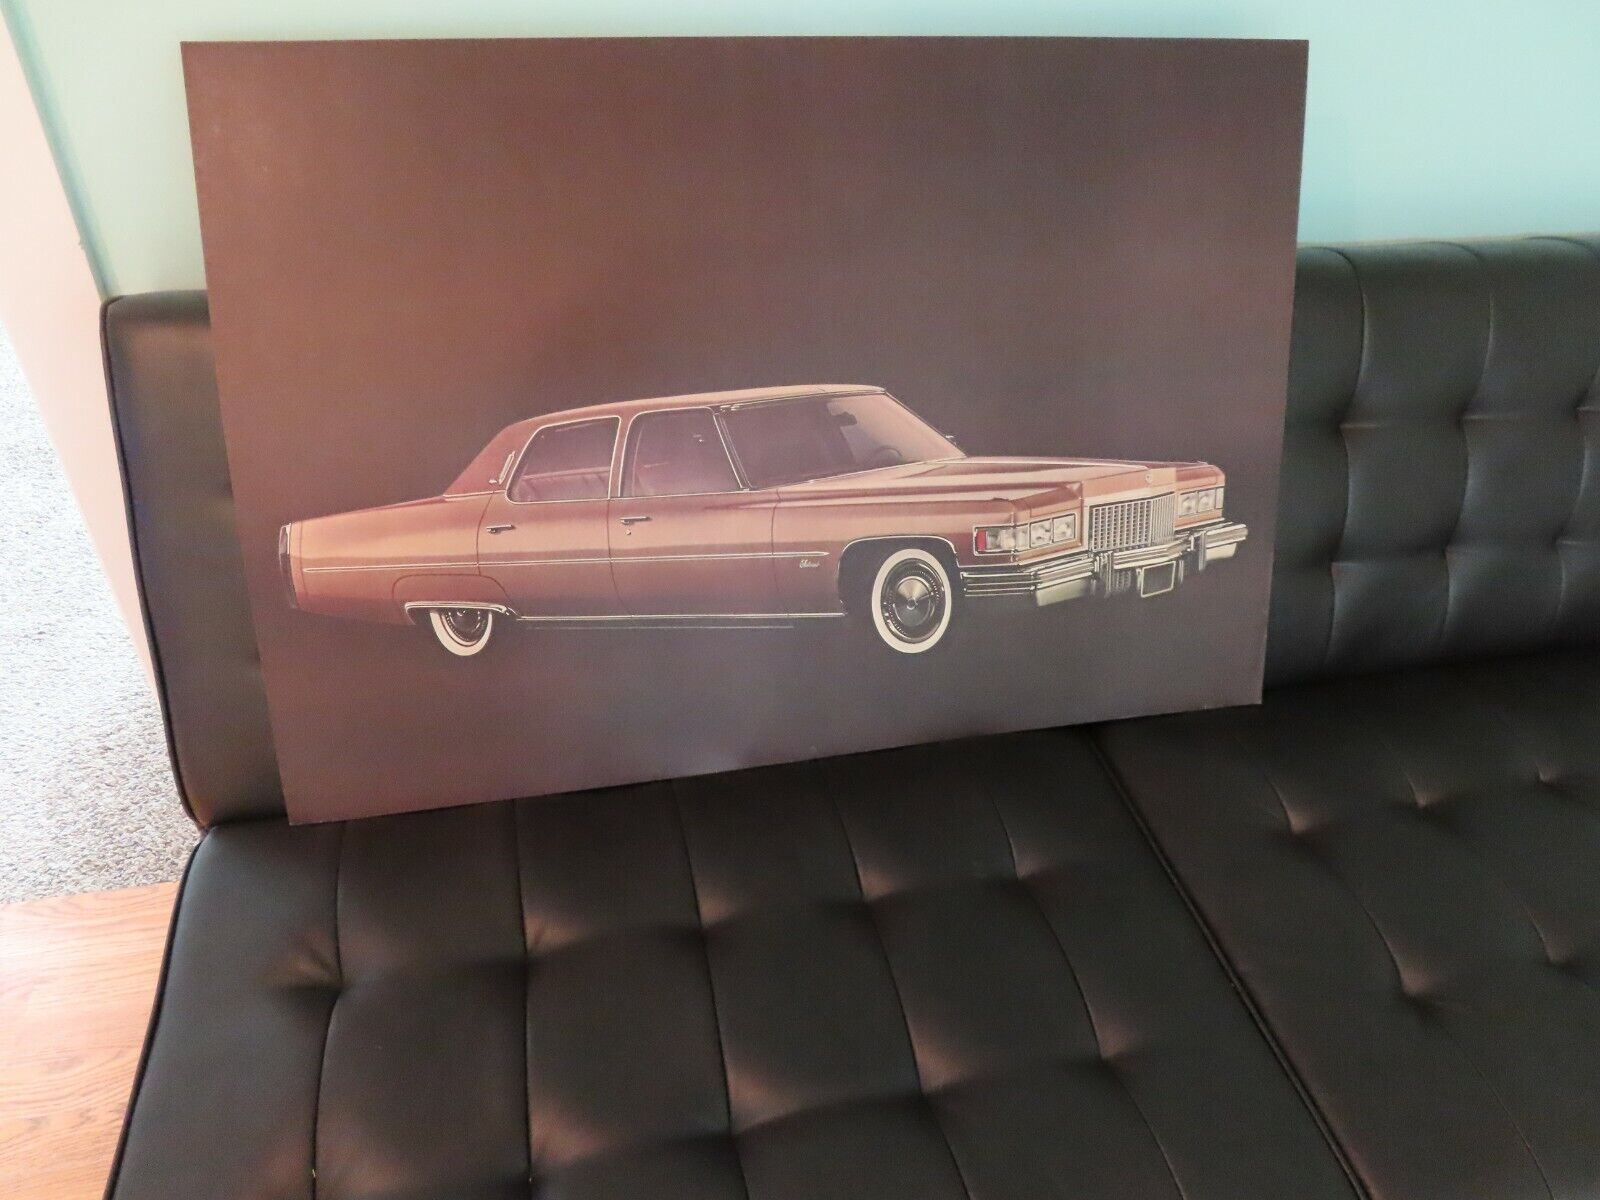 Huge NOS 1975 Cadillac Fleetwood double sided dealership showroom poster 